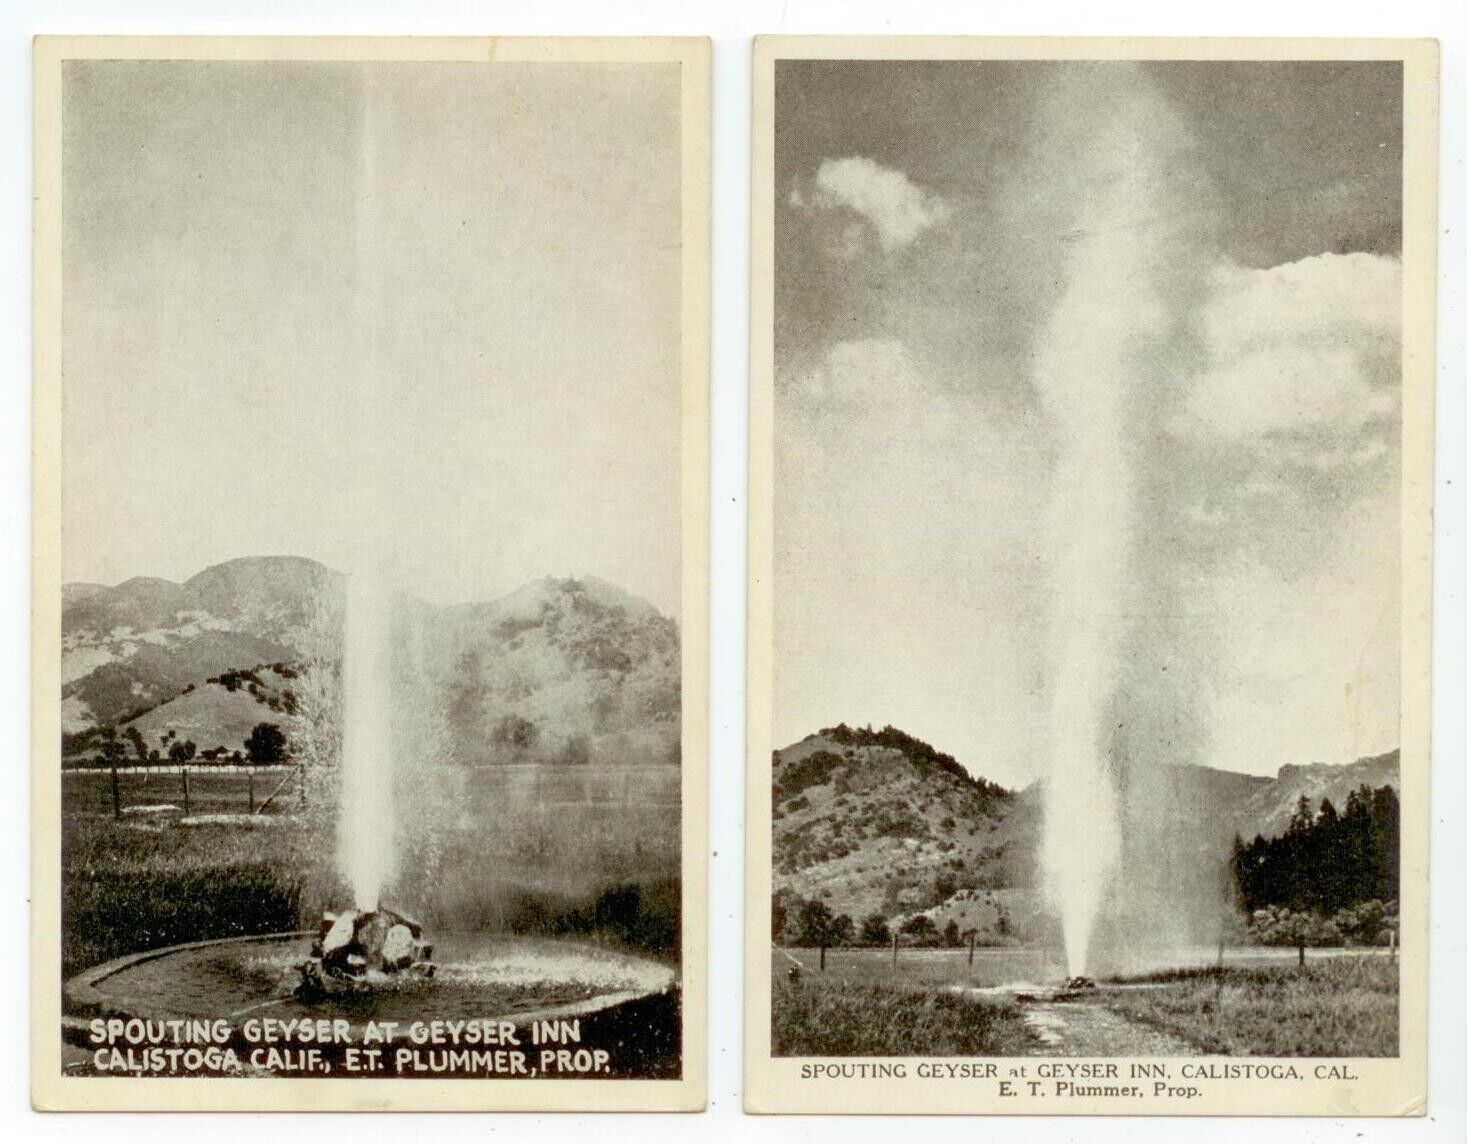 c1920s California Calistoga Spouting Geyser at Geyser Inn - two different